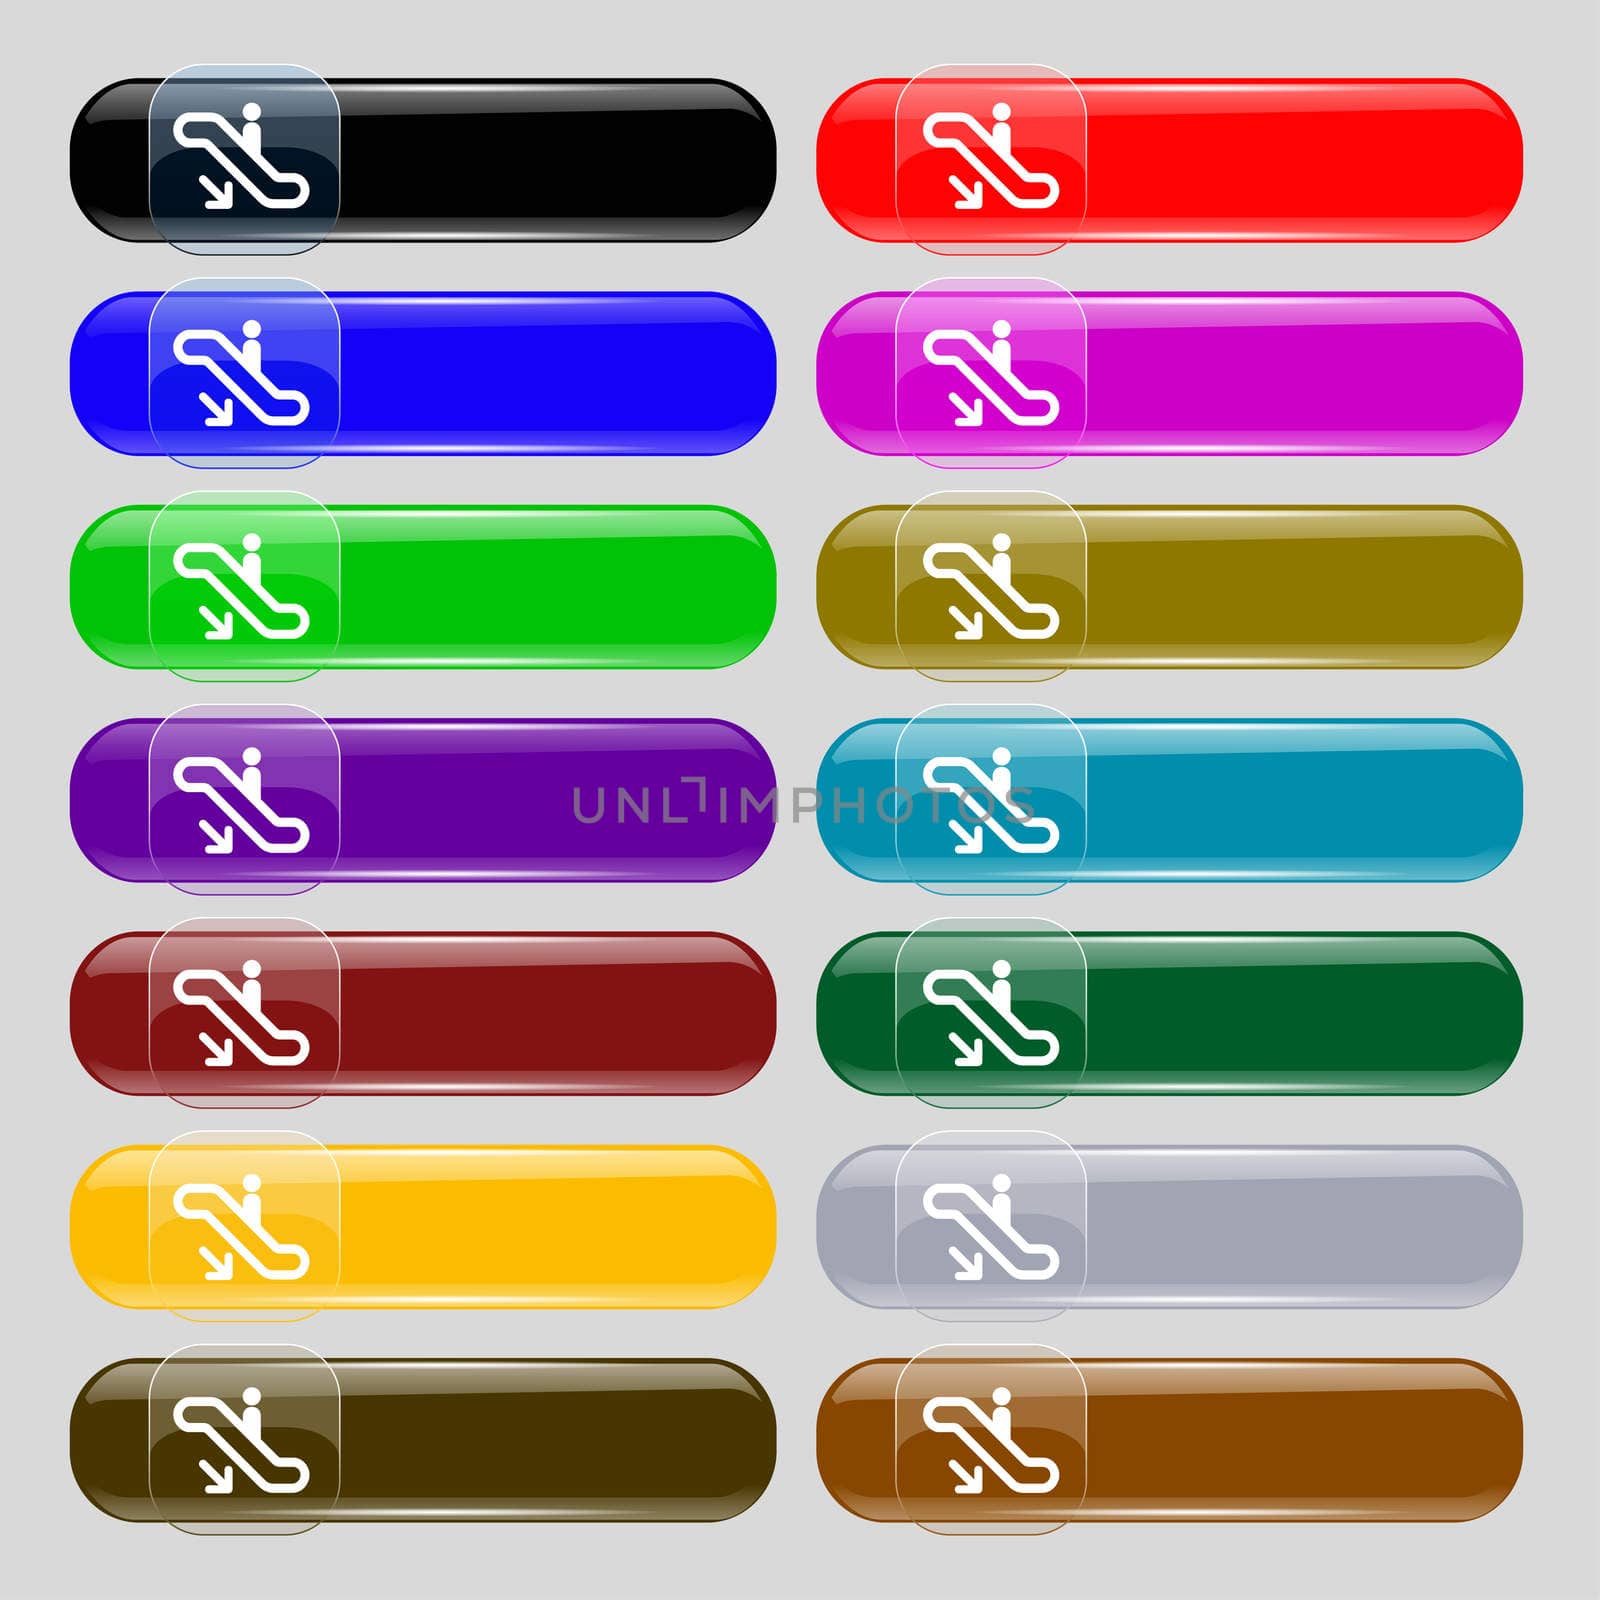 elevator, Escalator, Staircase icon sign. Set from fourteen multi-colored glass buttons with place for text. illustration